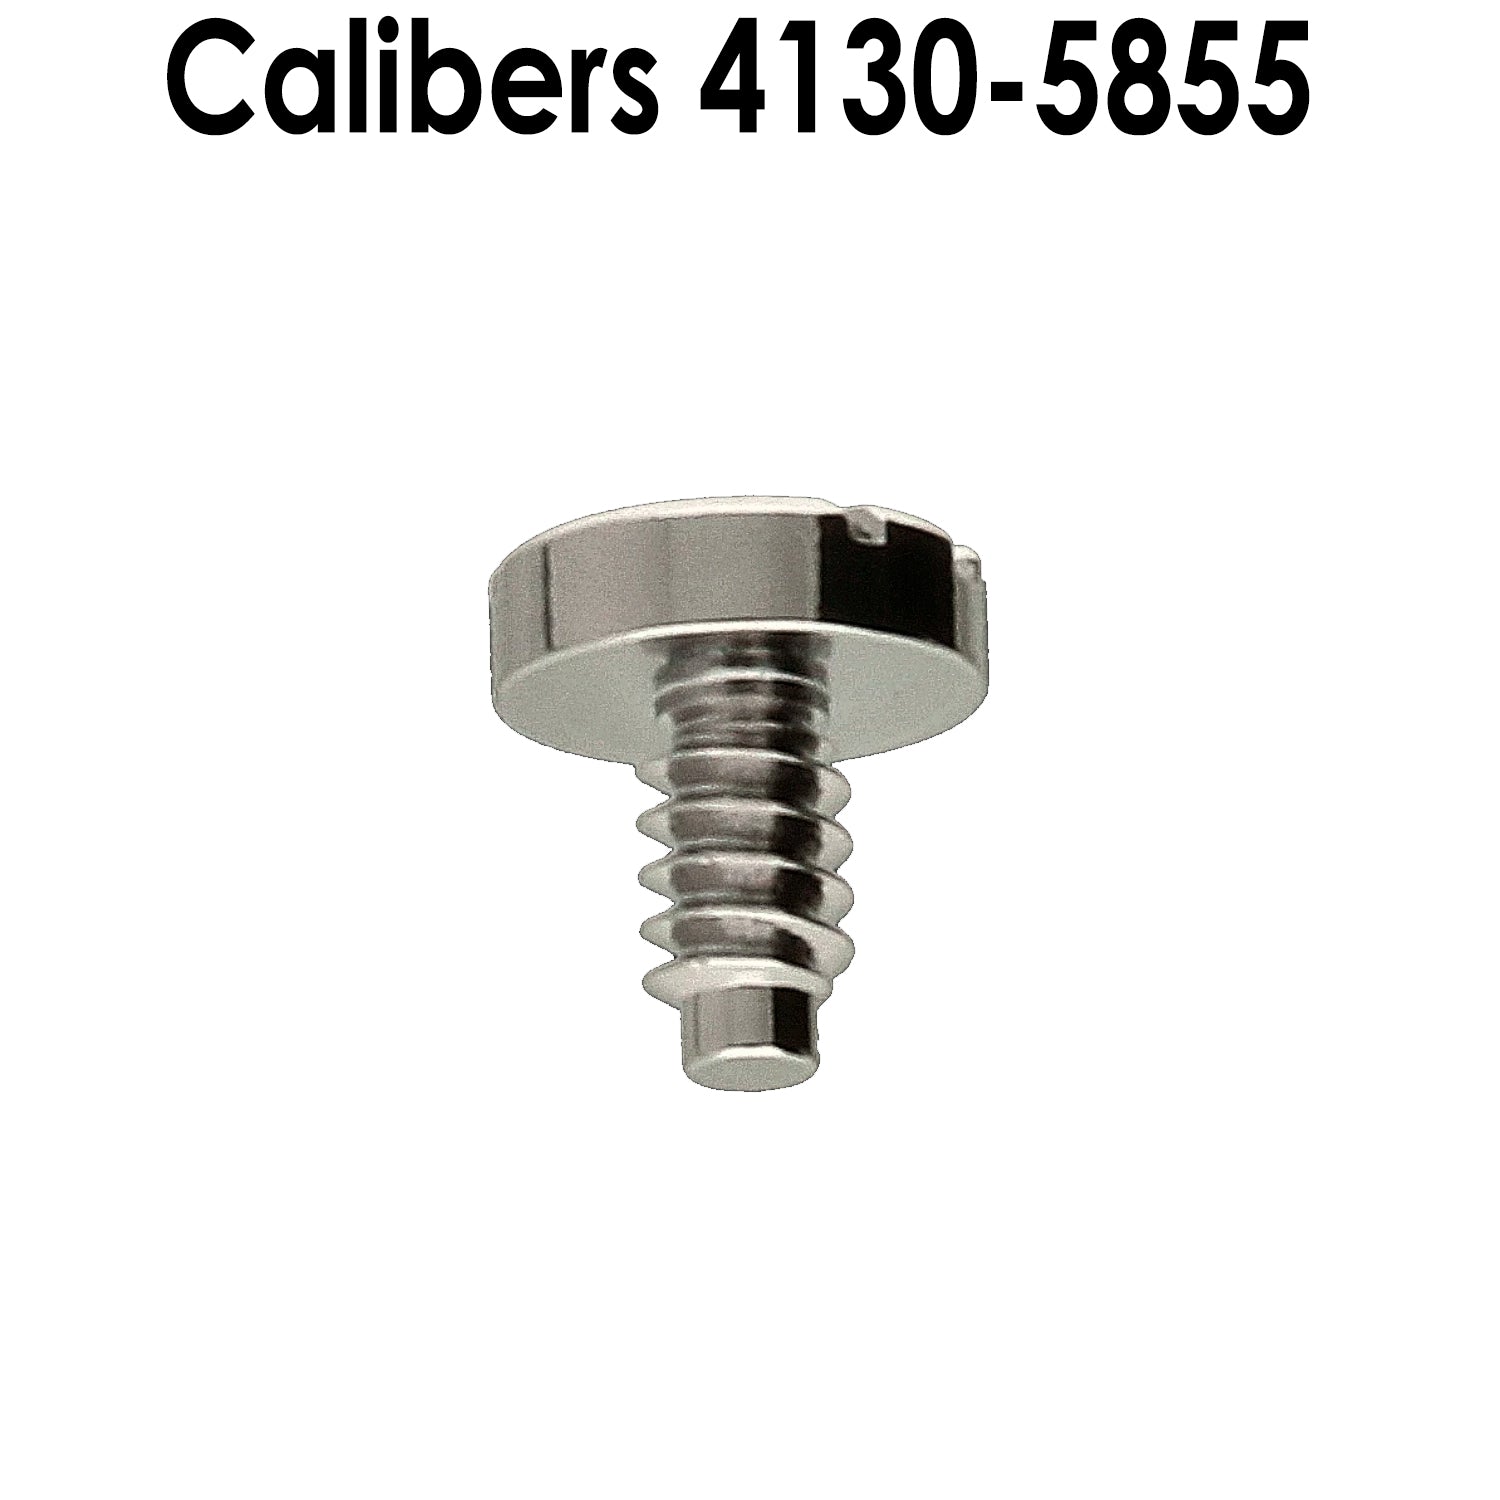 Internal Parts to fit Rolex 41 Series Calibers 4130